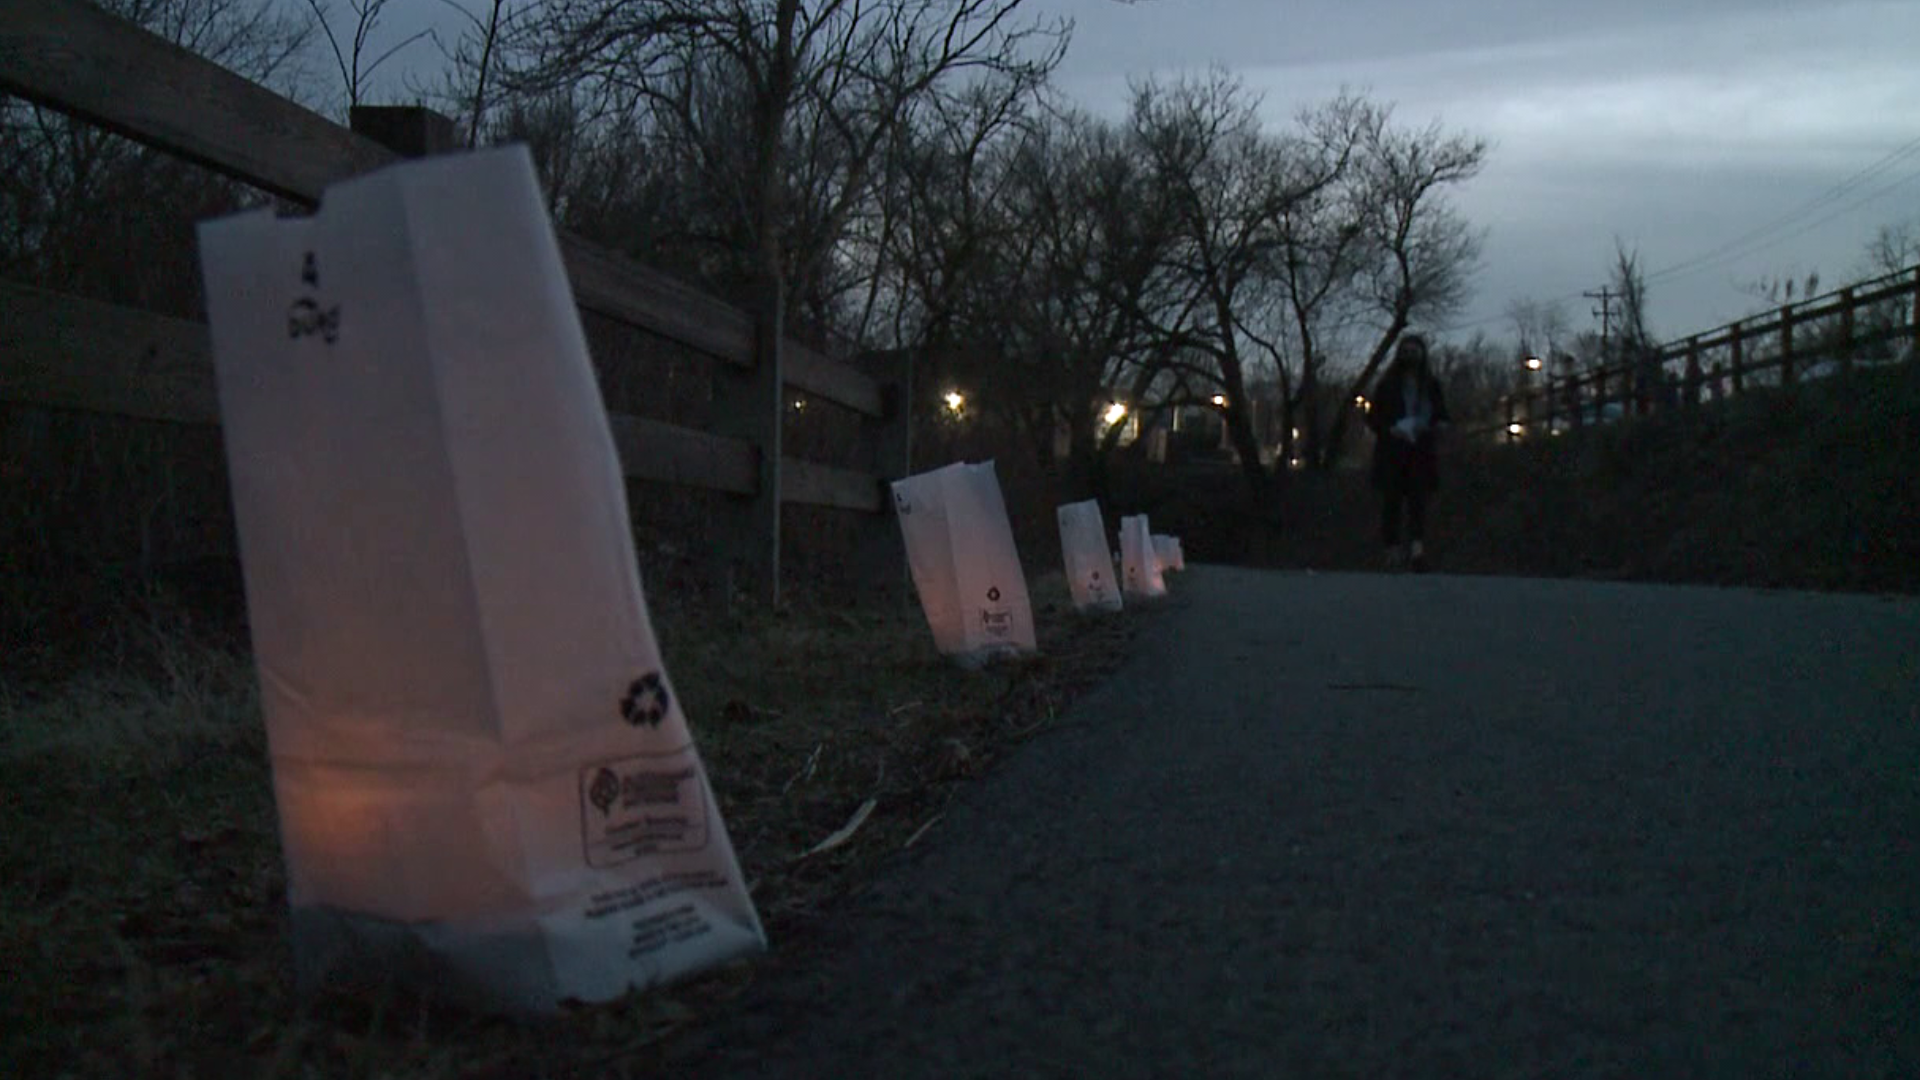 Luminaries were lit in Scranton on the one-year anniversary of the first confirmed person to have died from COVID-19 from Lackawanna County.